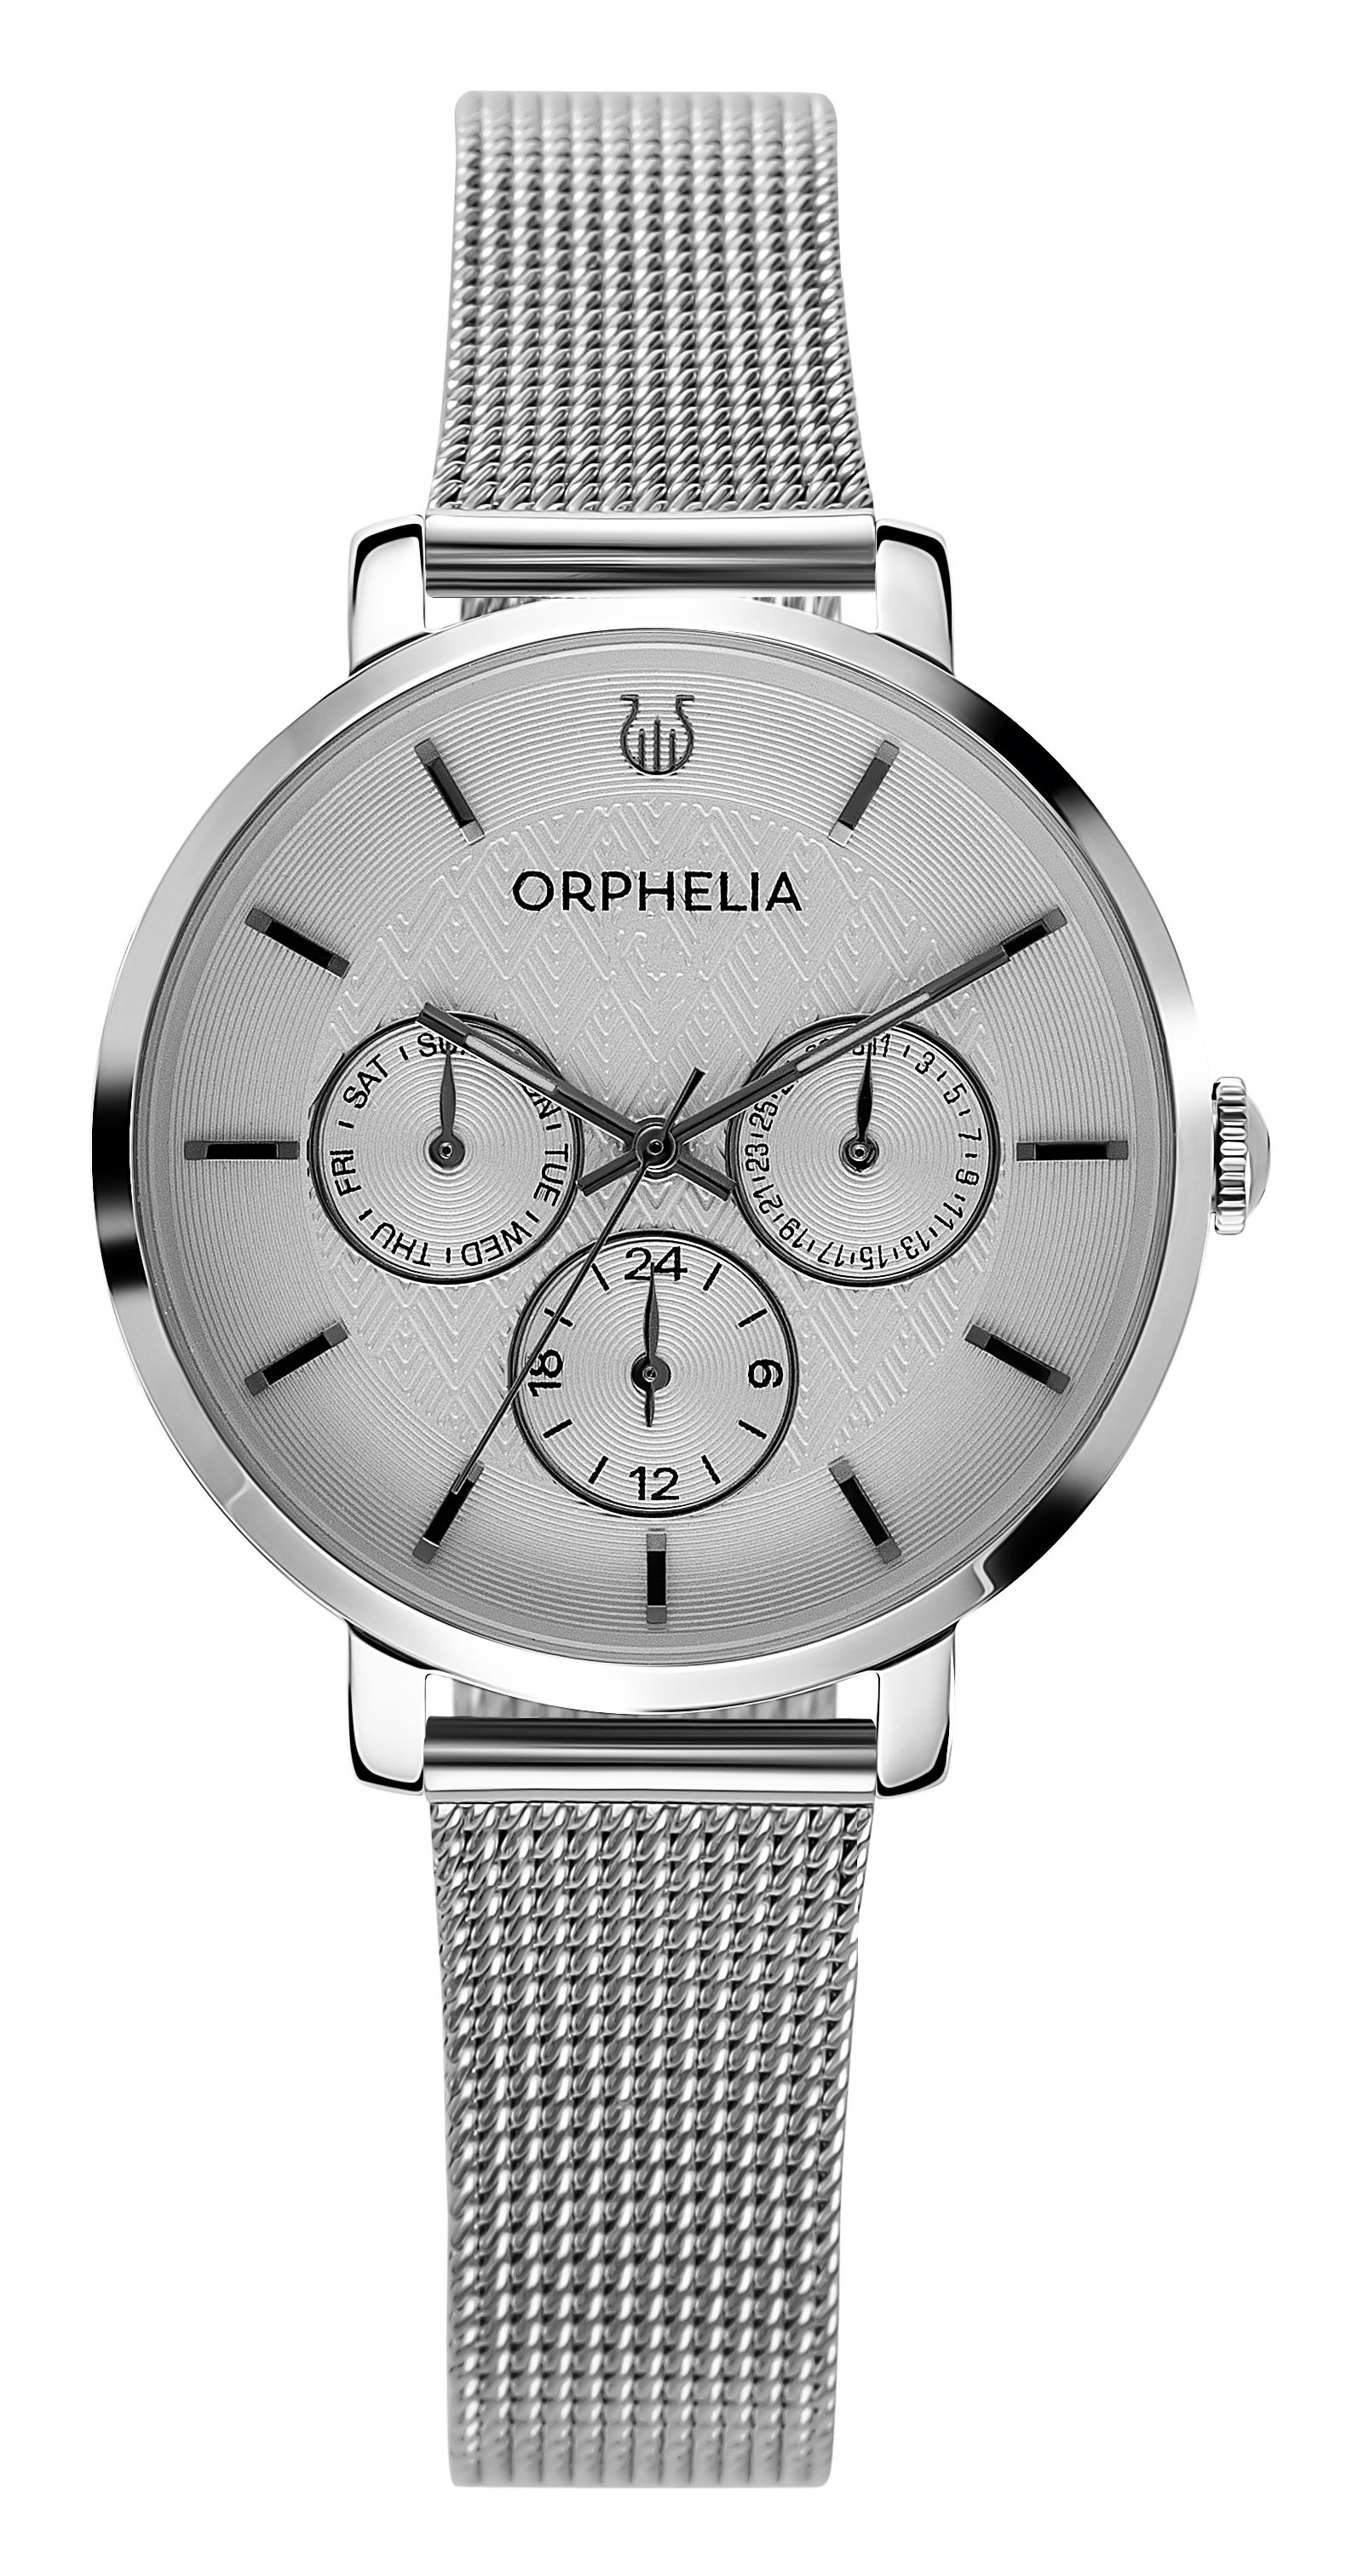 This Orphelia Derby Multi Dial Watch for Women is the perfect timepiece to wear or to gift. It's Silver 35 mm Round case combined with the comfortable Silver Stainless steel watch band will ensure you enjoy this stunning timepiece without any compromise. Operated by a high quality Quartz movement and water resistant to 3 bars, your watch will keep ticking. STRONG MATERIALS: This ORPHELIA Derby Multi dial watch with a Miyota Quartz movement includes a date and 24-hour display, its durable yet feminine, ready to shine in every event. PREMIUM QUALITY: By using high-quality materials  Glass: Mineral Glass  Case material: Stainless steel  Bracelet material: Stainless steel- Water resistant: 3 bars COMPACT SIZE: Case diameter: 35 mm  Height: 8 mm  Strap- Length: 21 cm  Width: 12 mm. Due to this practical handy size  the watch is absolutely for everyday use-Weight: 45 g